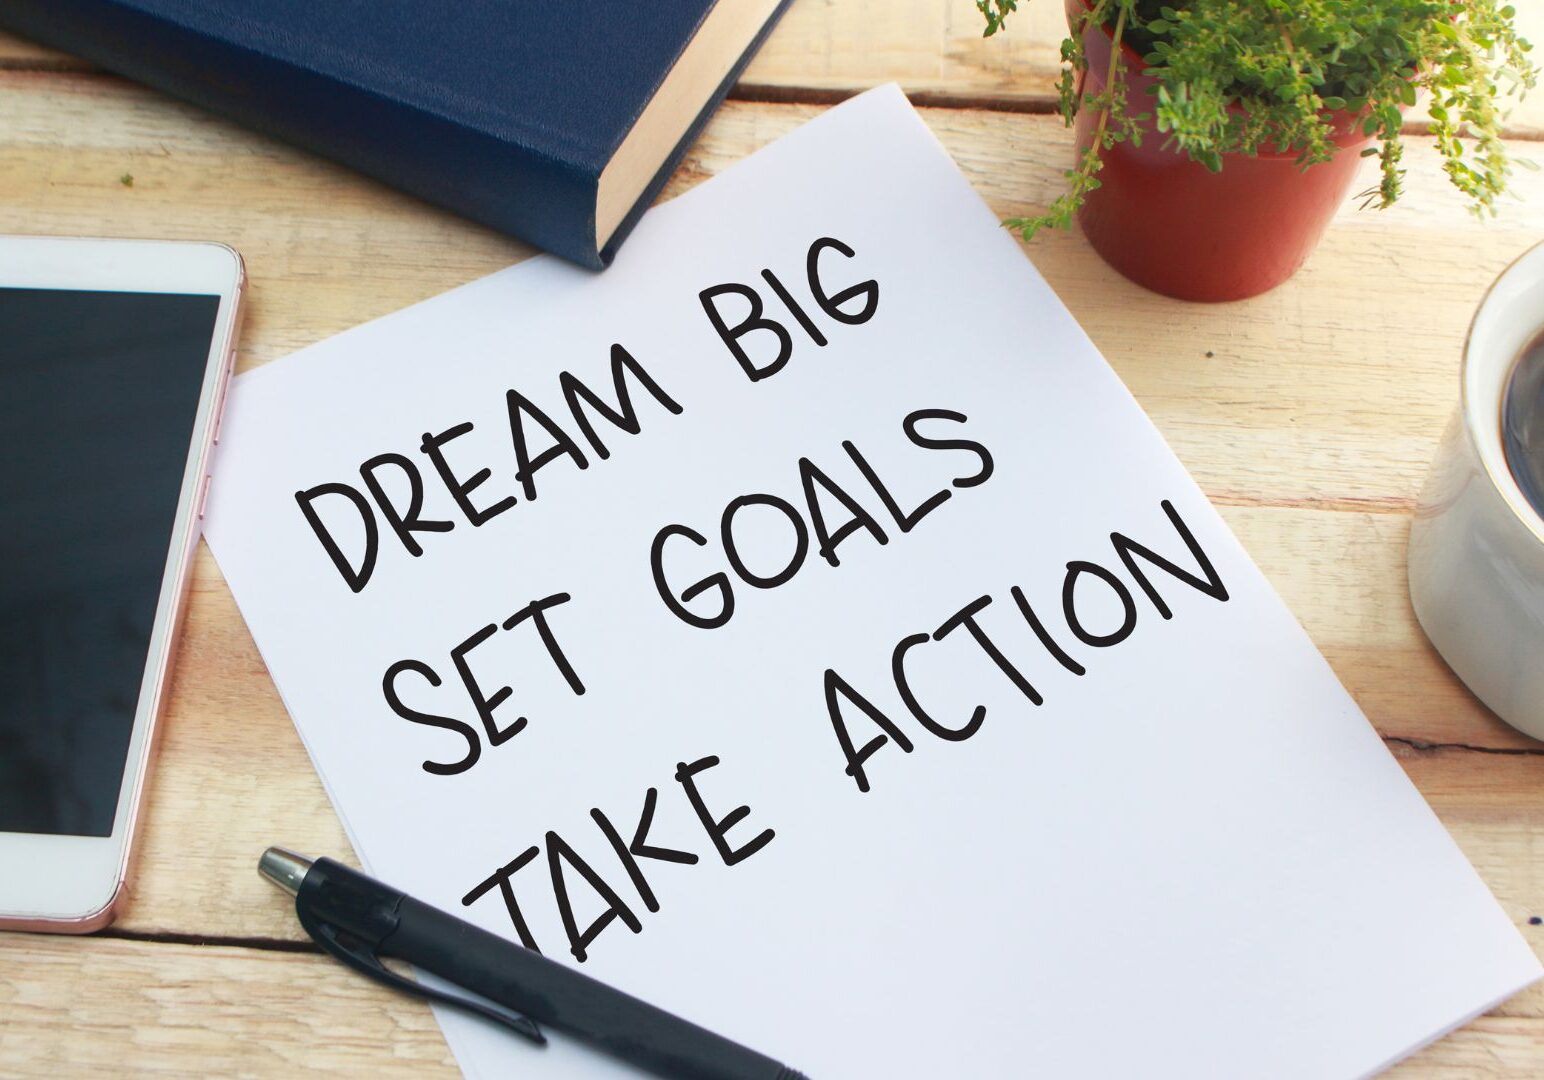 Piece of paper that says "Dream Big, Set Goals, Take Action."